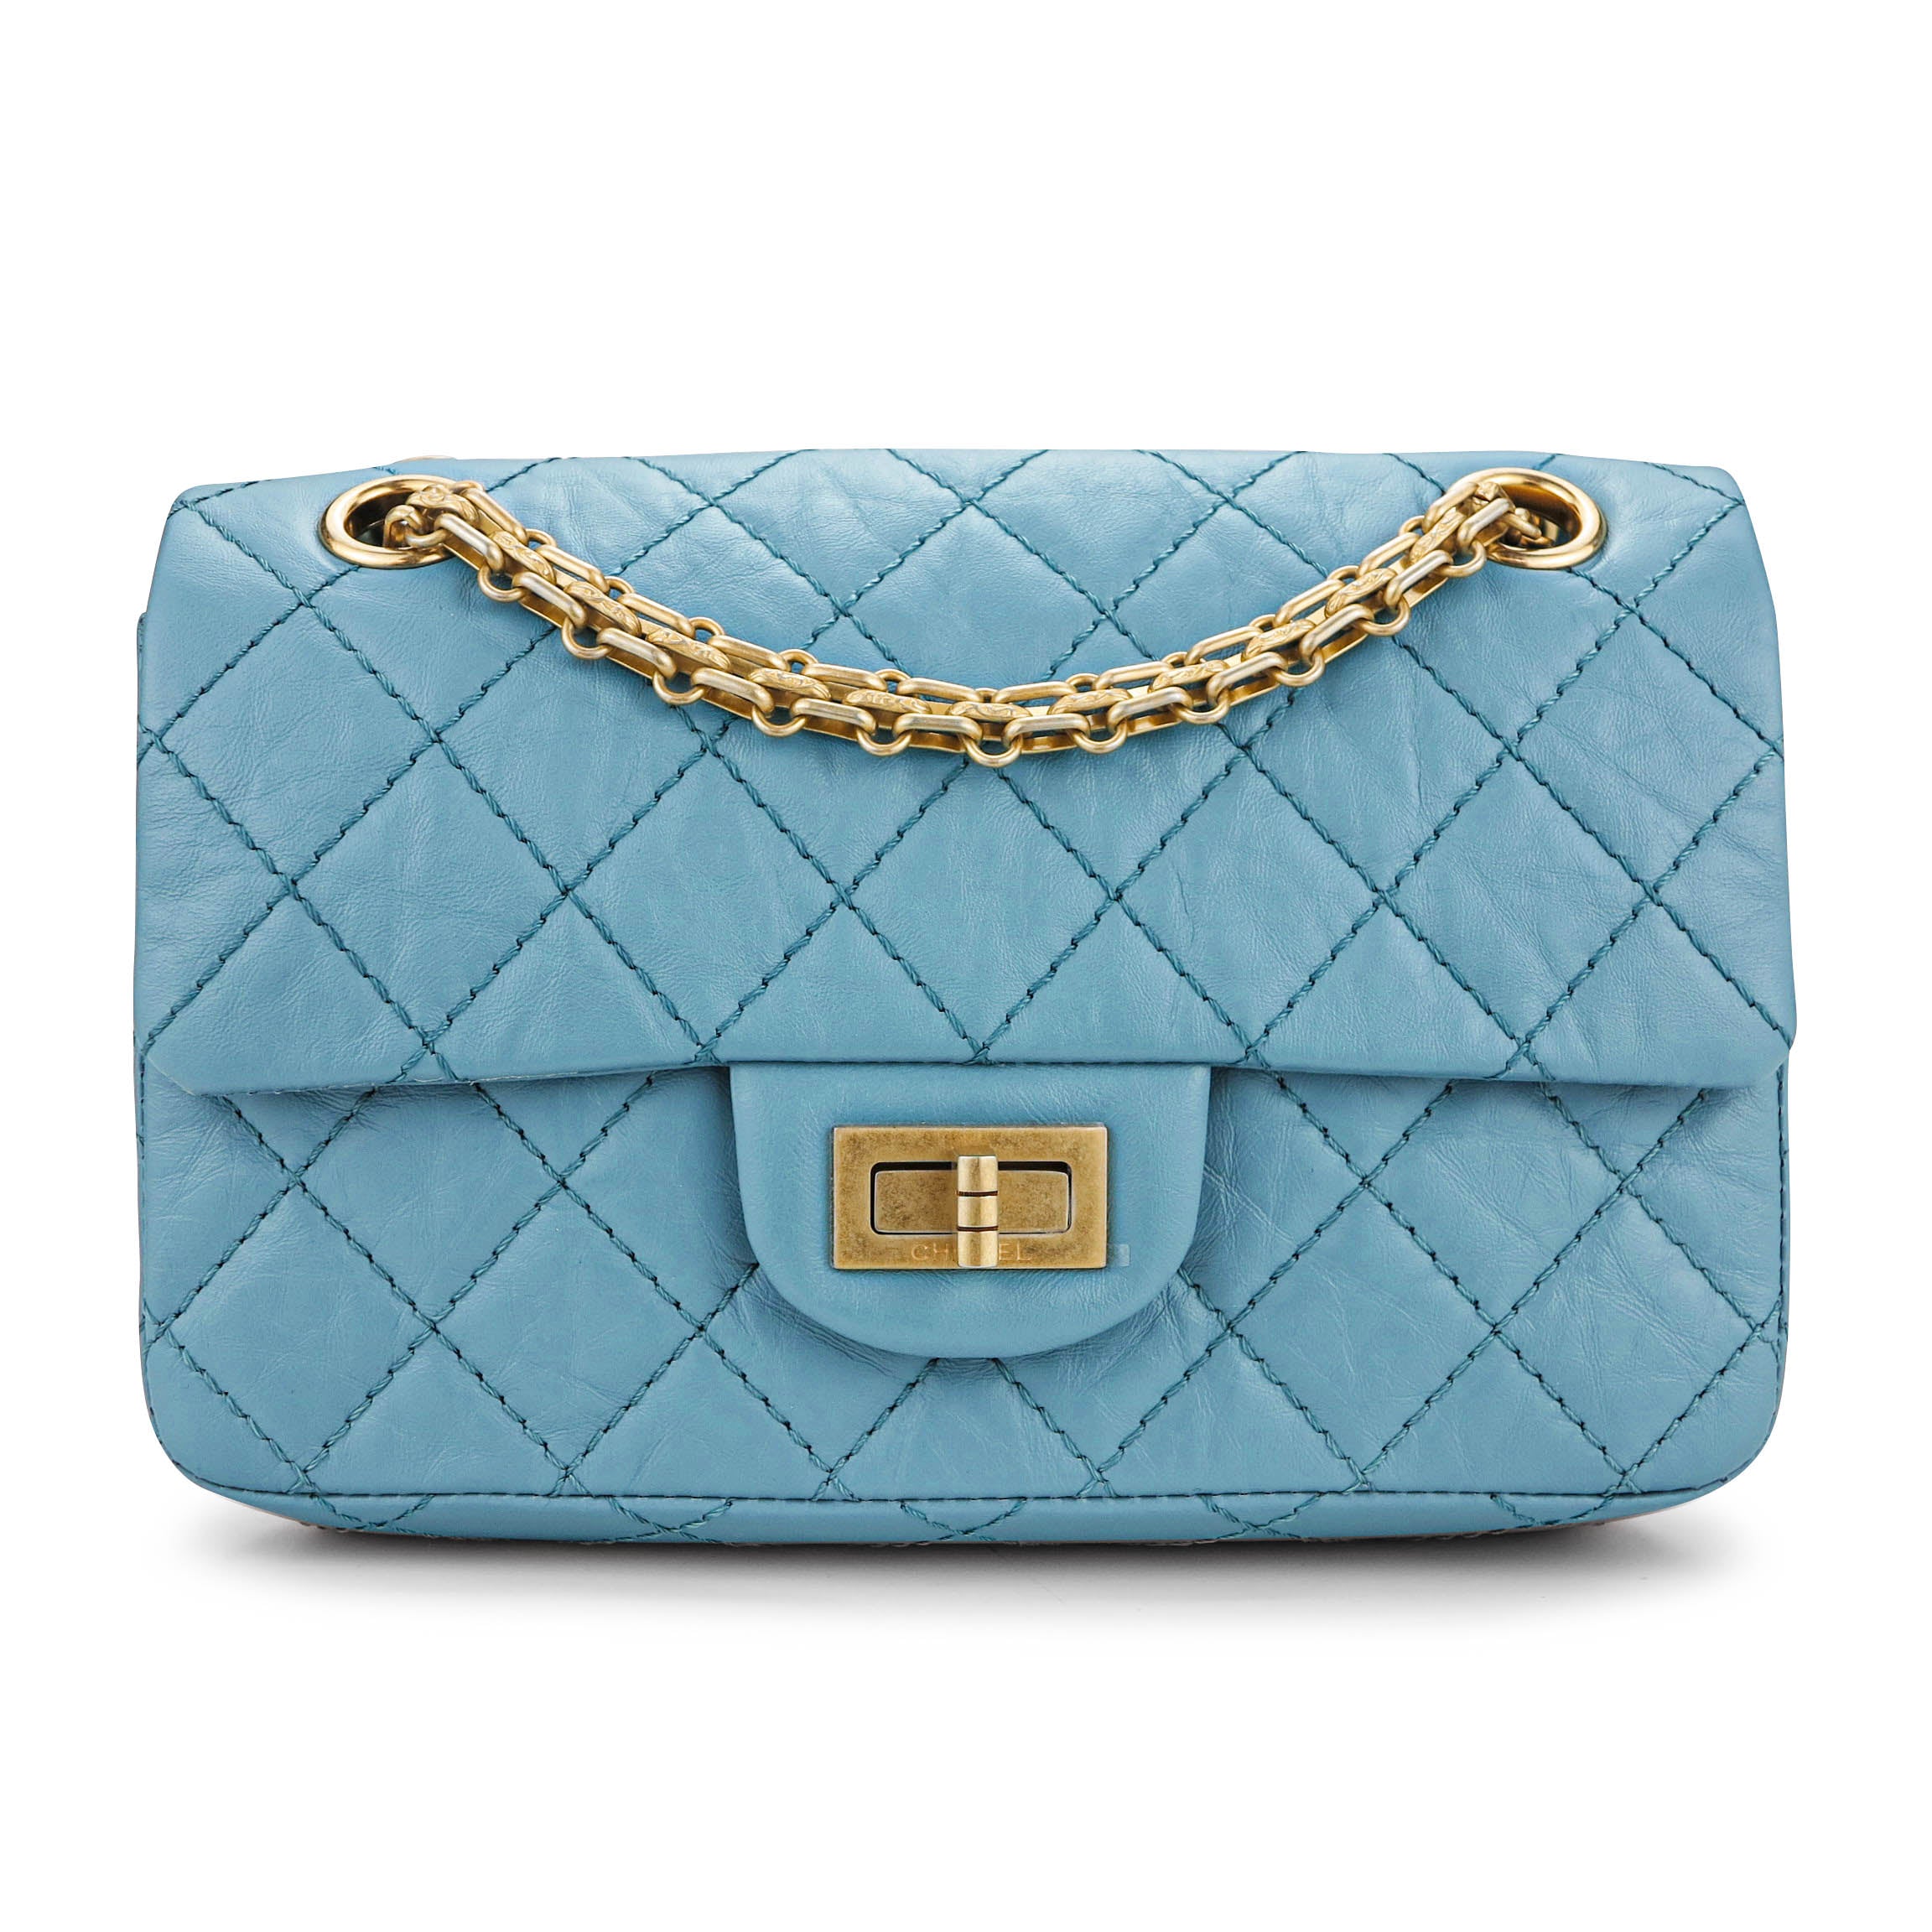 Chanel Purse Blue Leather Flap - 167 For Sale on 1stDibs